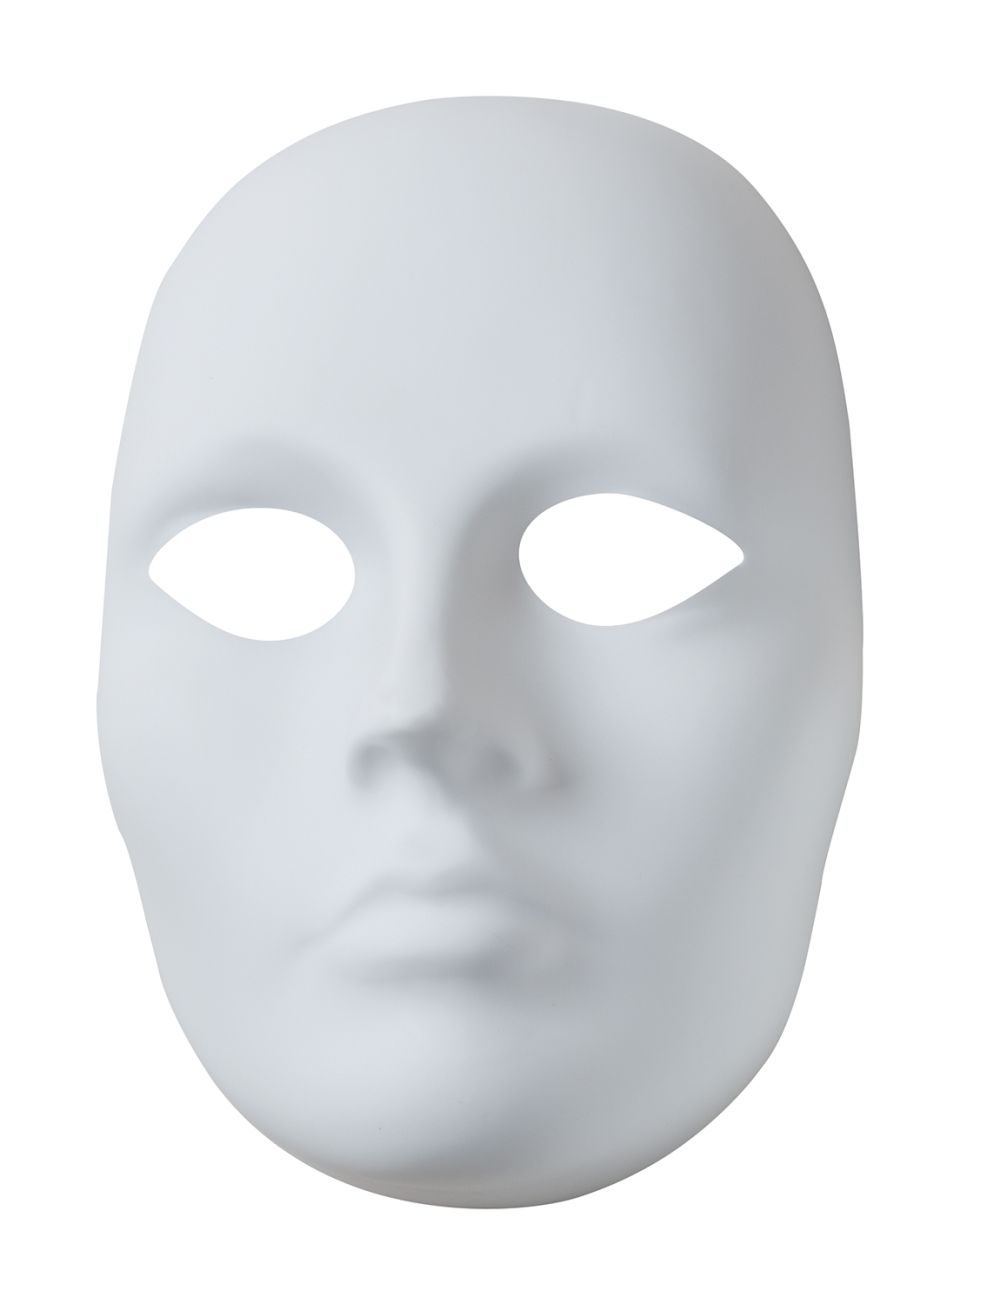 Plastic Mask - Pacon Creative Products